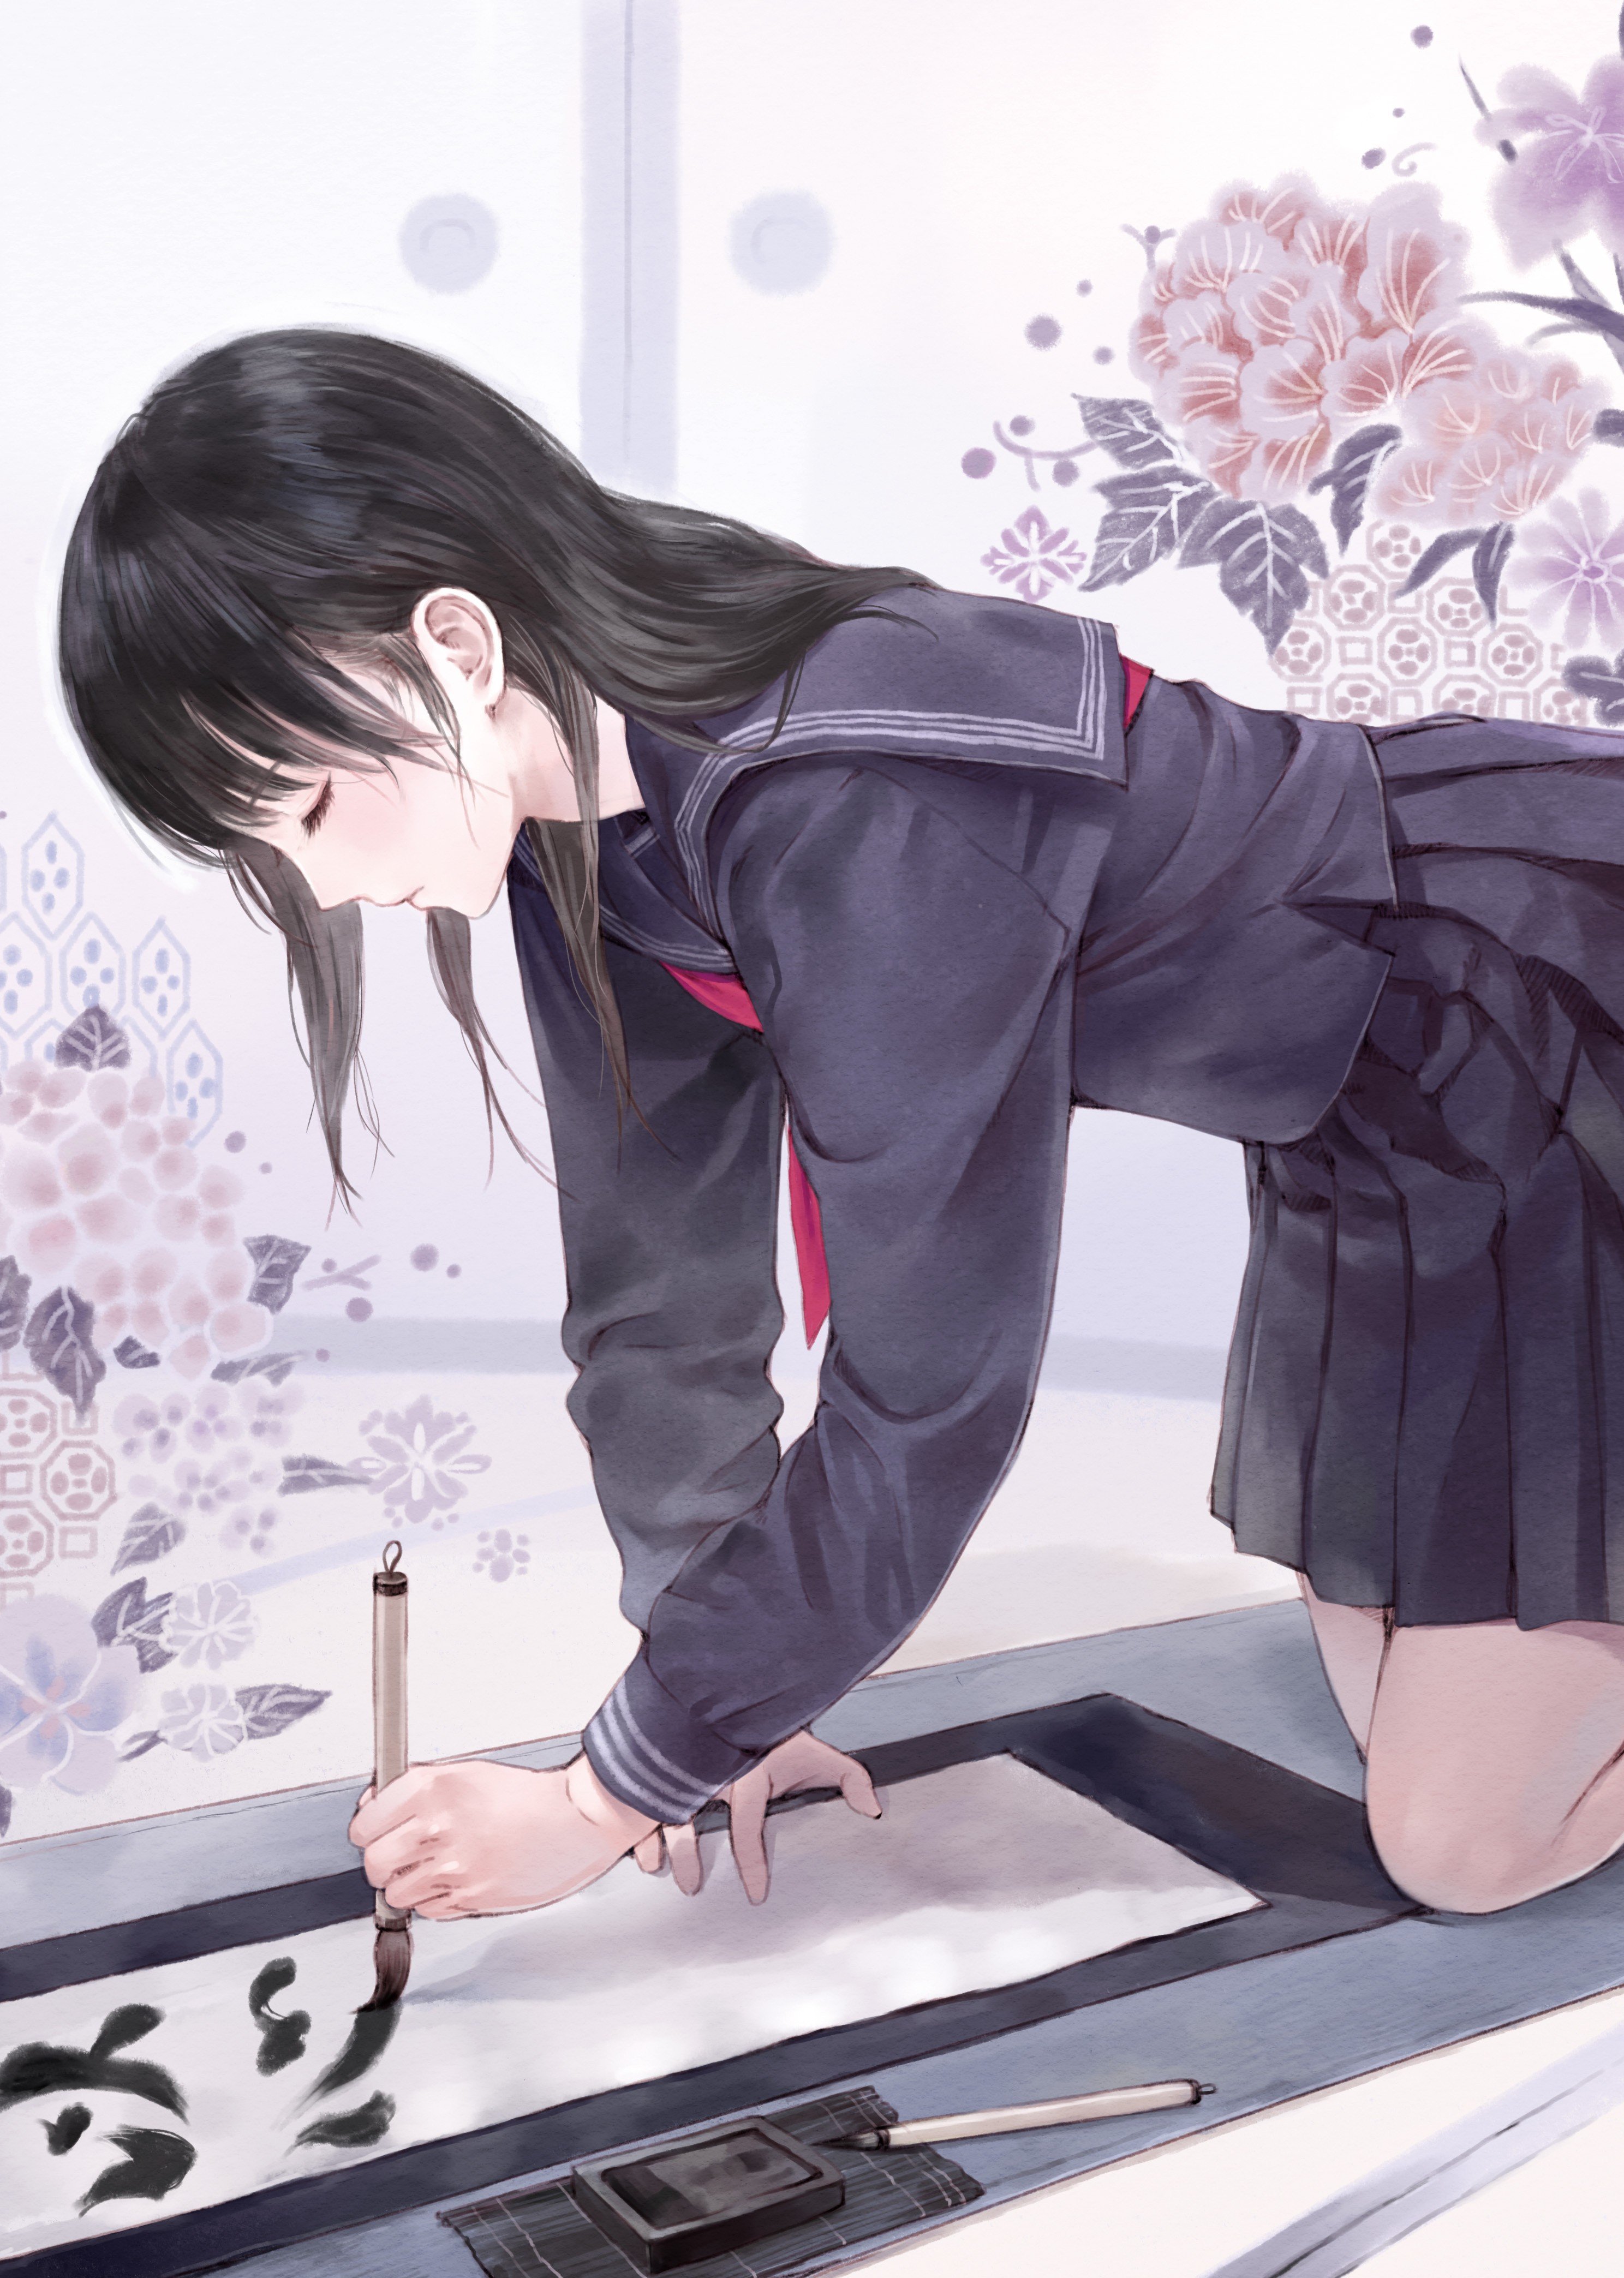 flowers, Indoors, School, Uniforms, Schoolgirls, Skirts, Long, Hair, On, All, Fours, Closed, Eyes, Caligraphy, Anime, Girls, Paint, Brushes, Sailor, Uniforms, Black, Hair, Brushes, Original, Characters Wallpaper